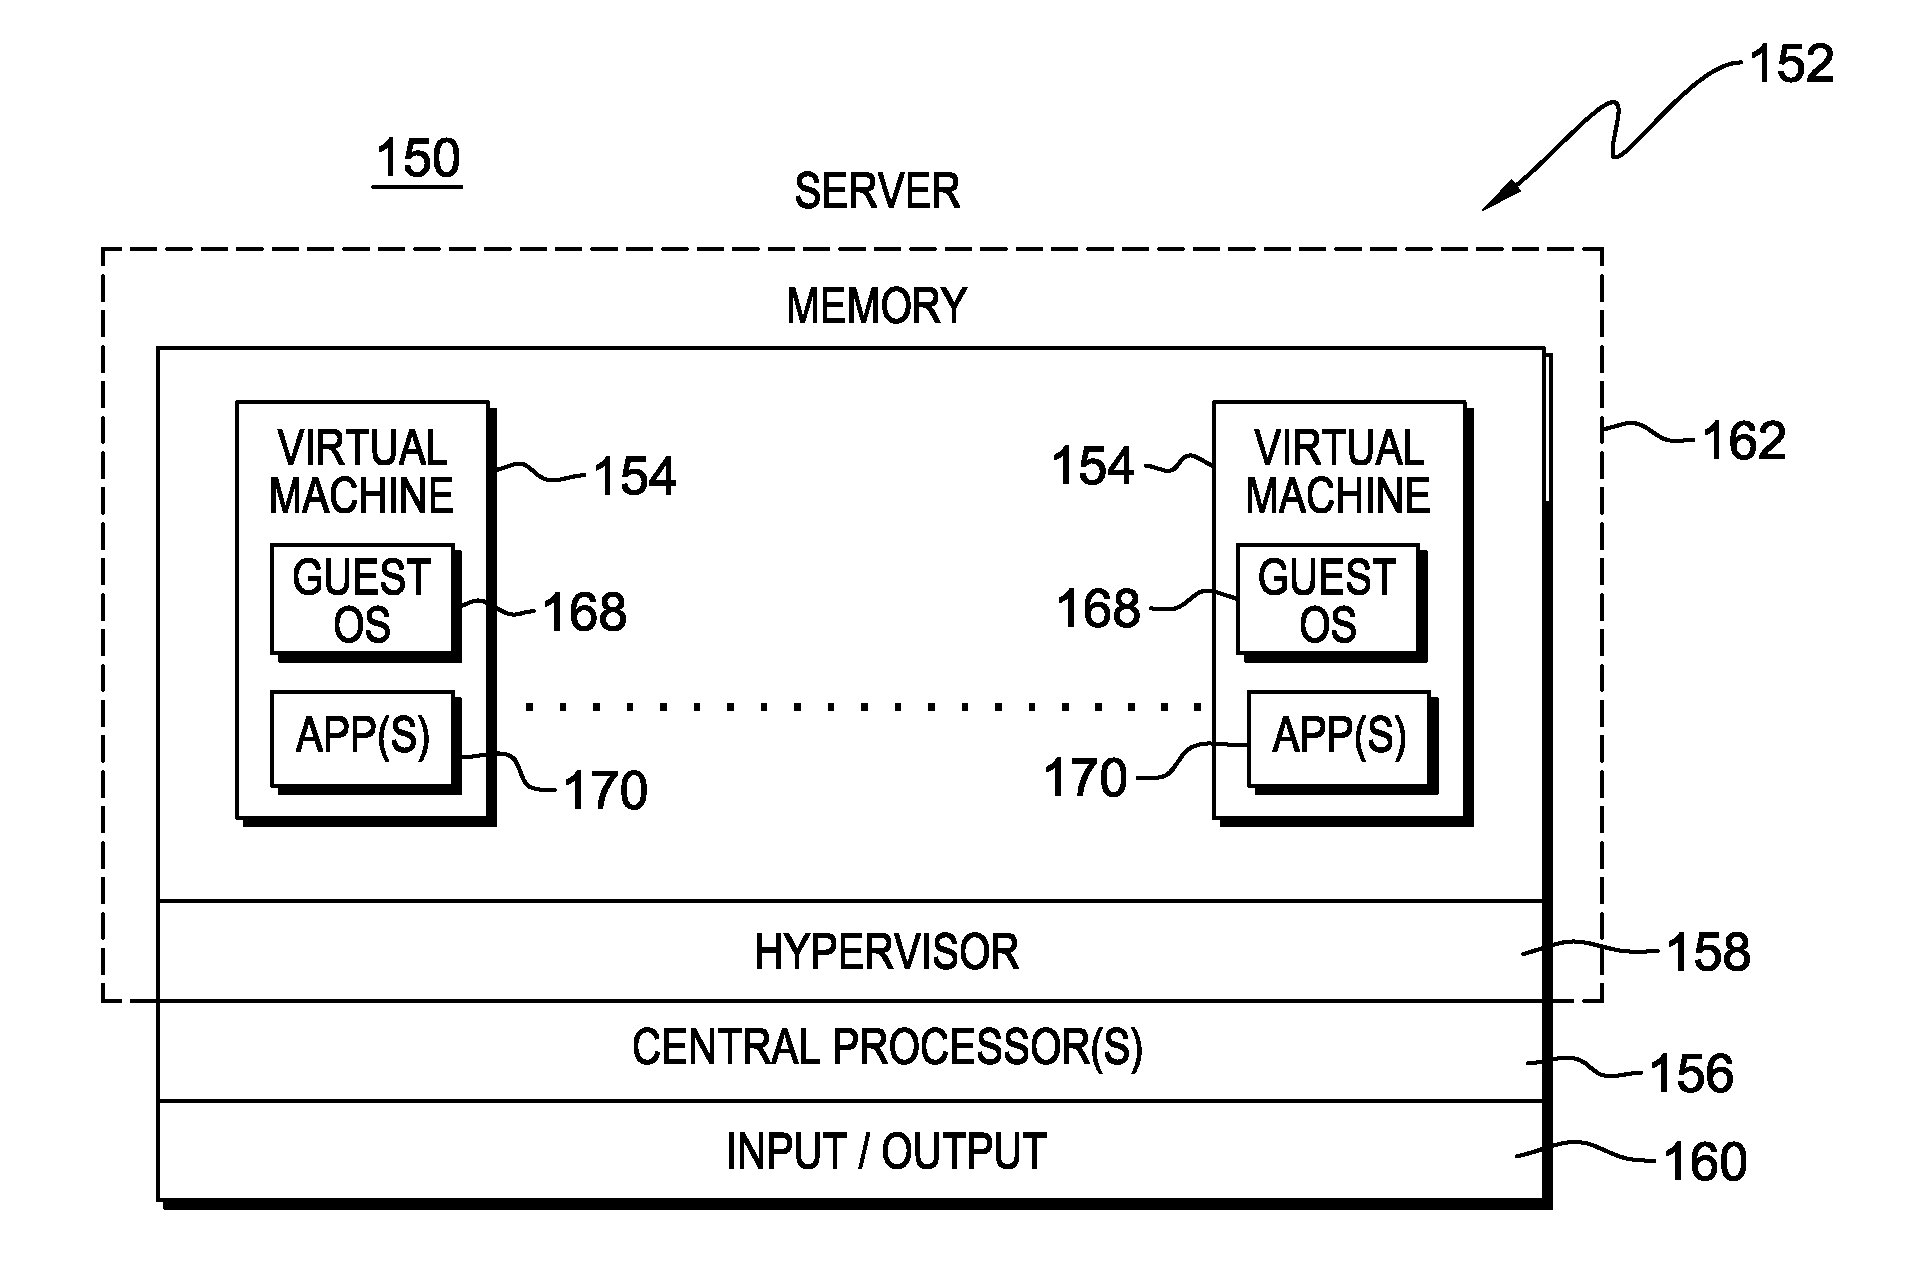 Supporting multiple types of guests by a hypervisor